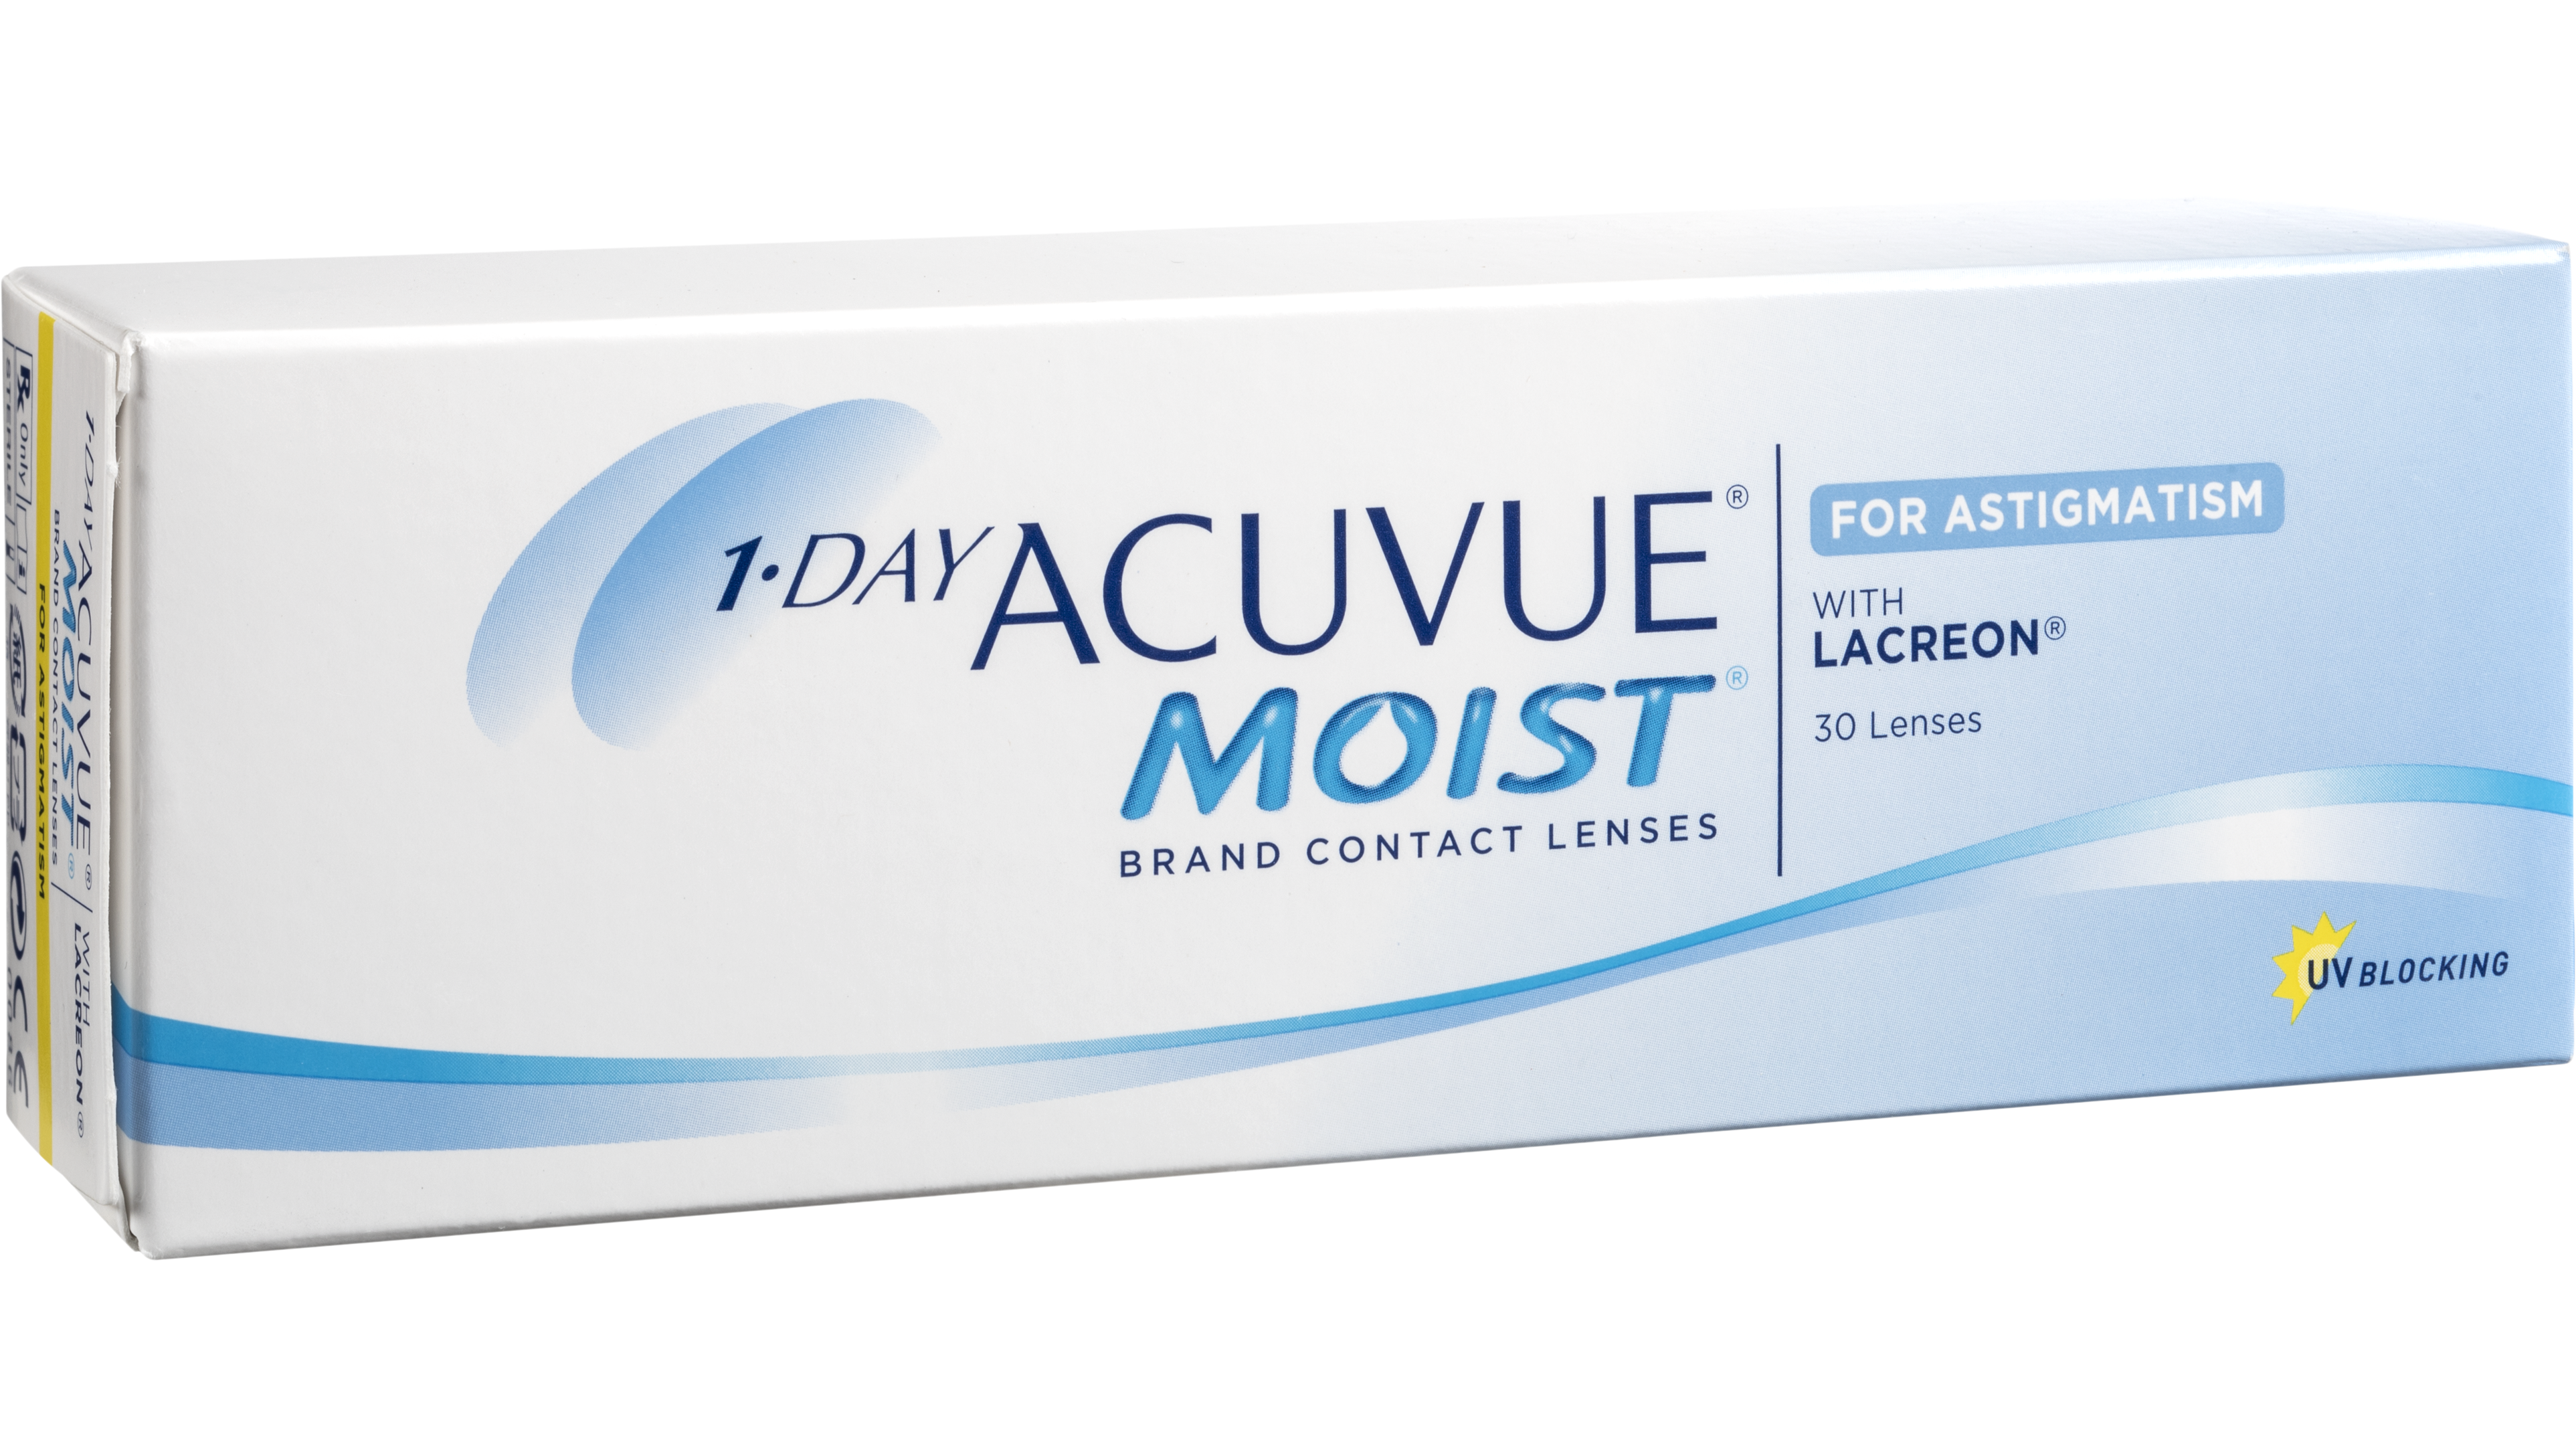 Angle_Right01 1-Day Acuvue Moist Astigmatism 30 unidades